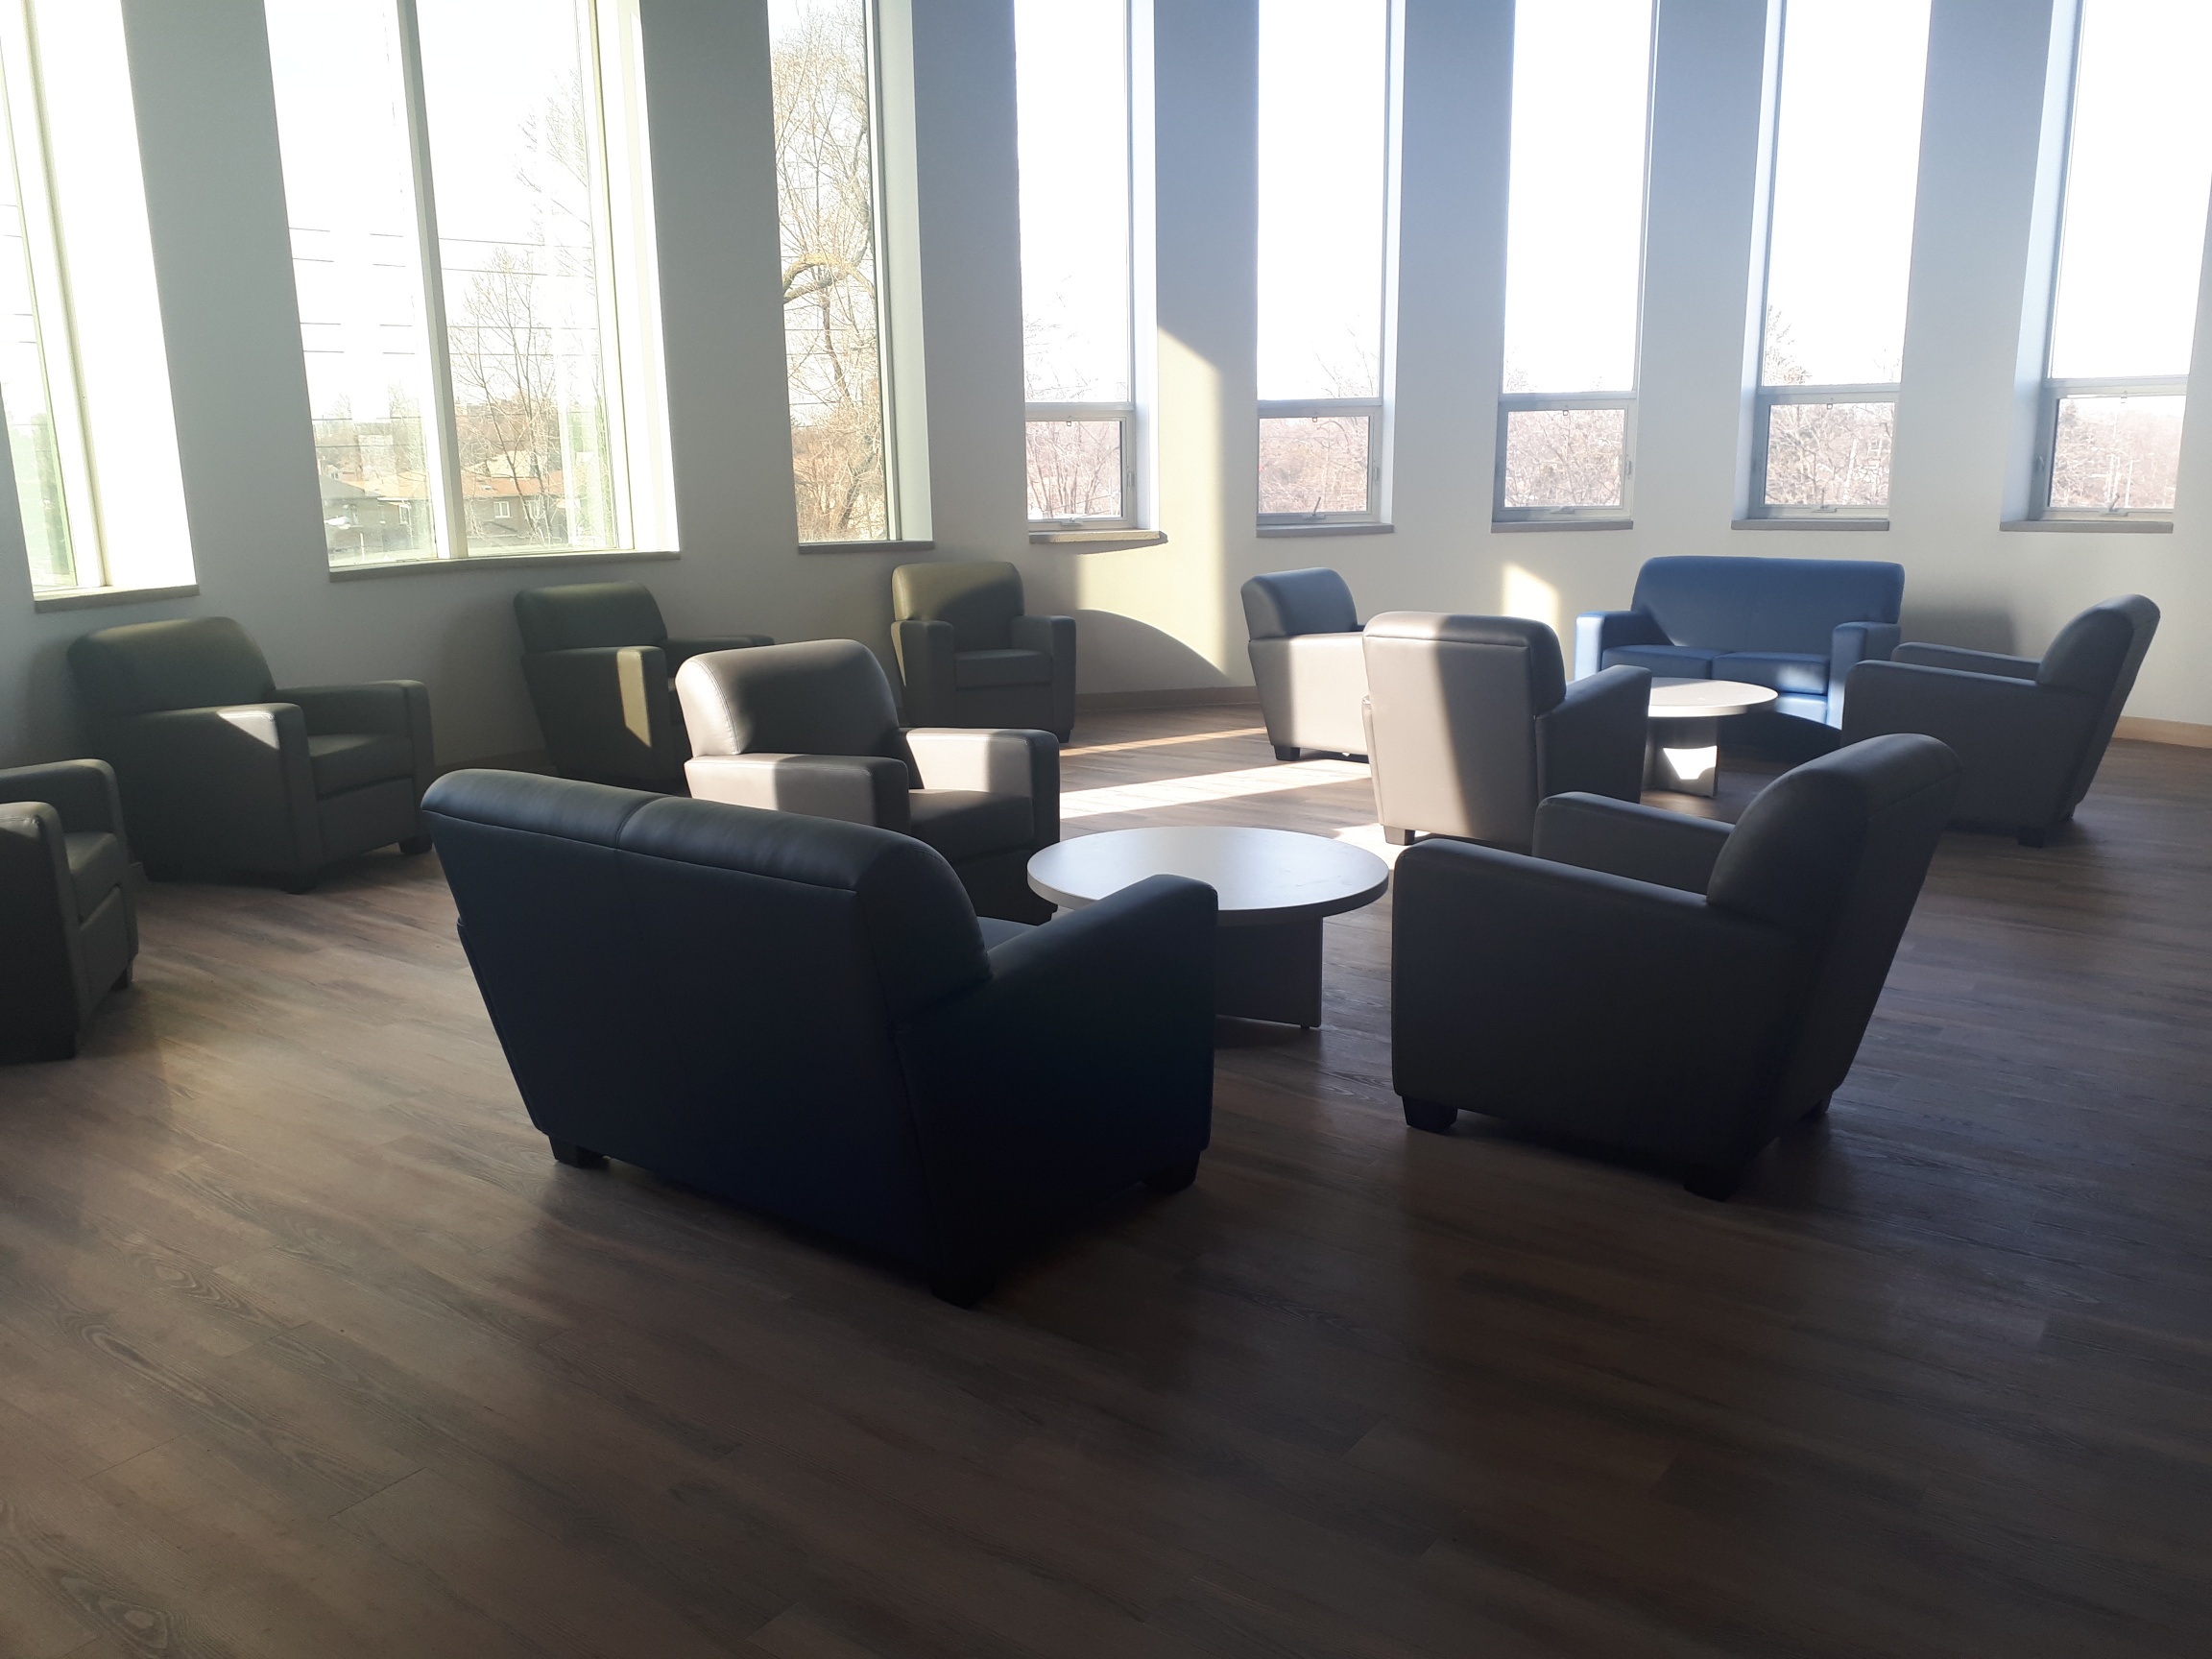 open lounge area with couches and multiple windows surrounding the lounge